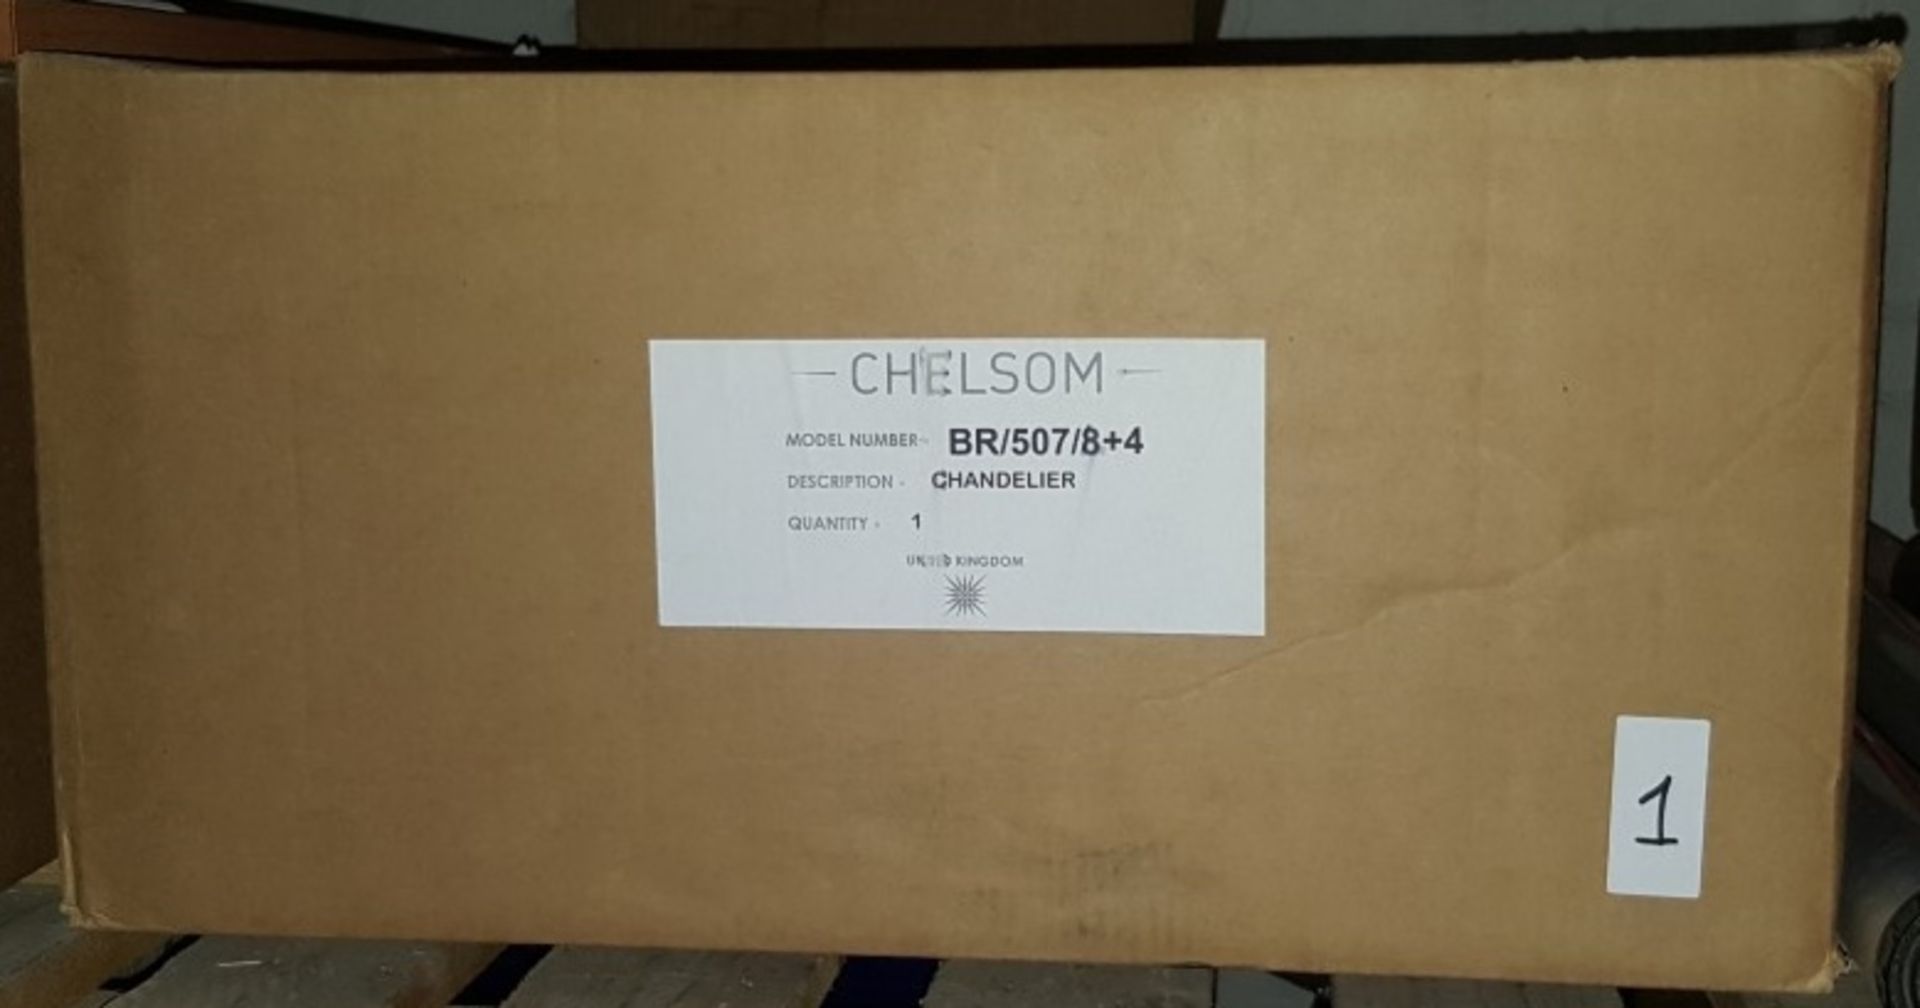 1 x New In Box Chelsom Ballroom Сhandelier BR/507/8+4 - CL001 - REF290/A31 - Location: Altrincham - Image 3 of 3